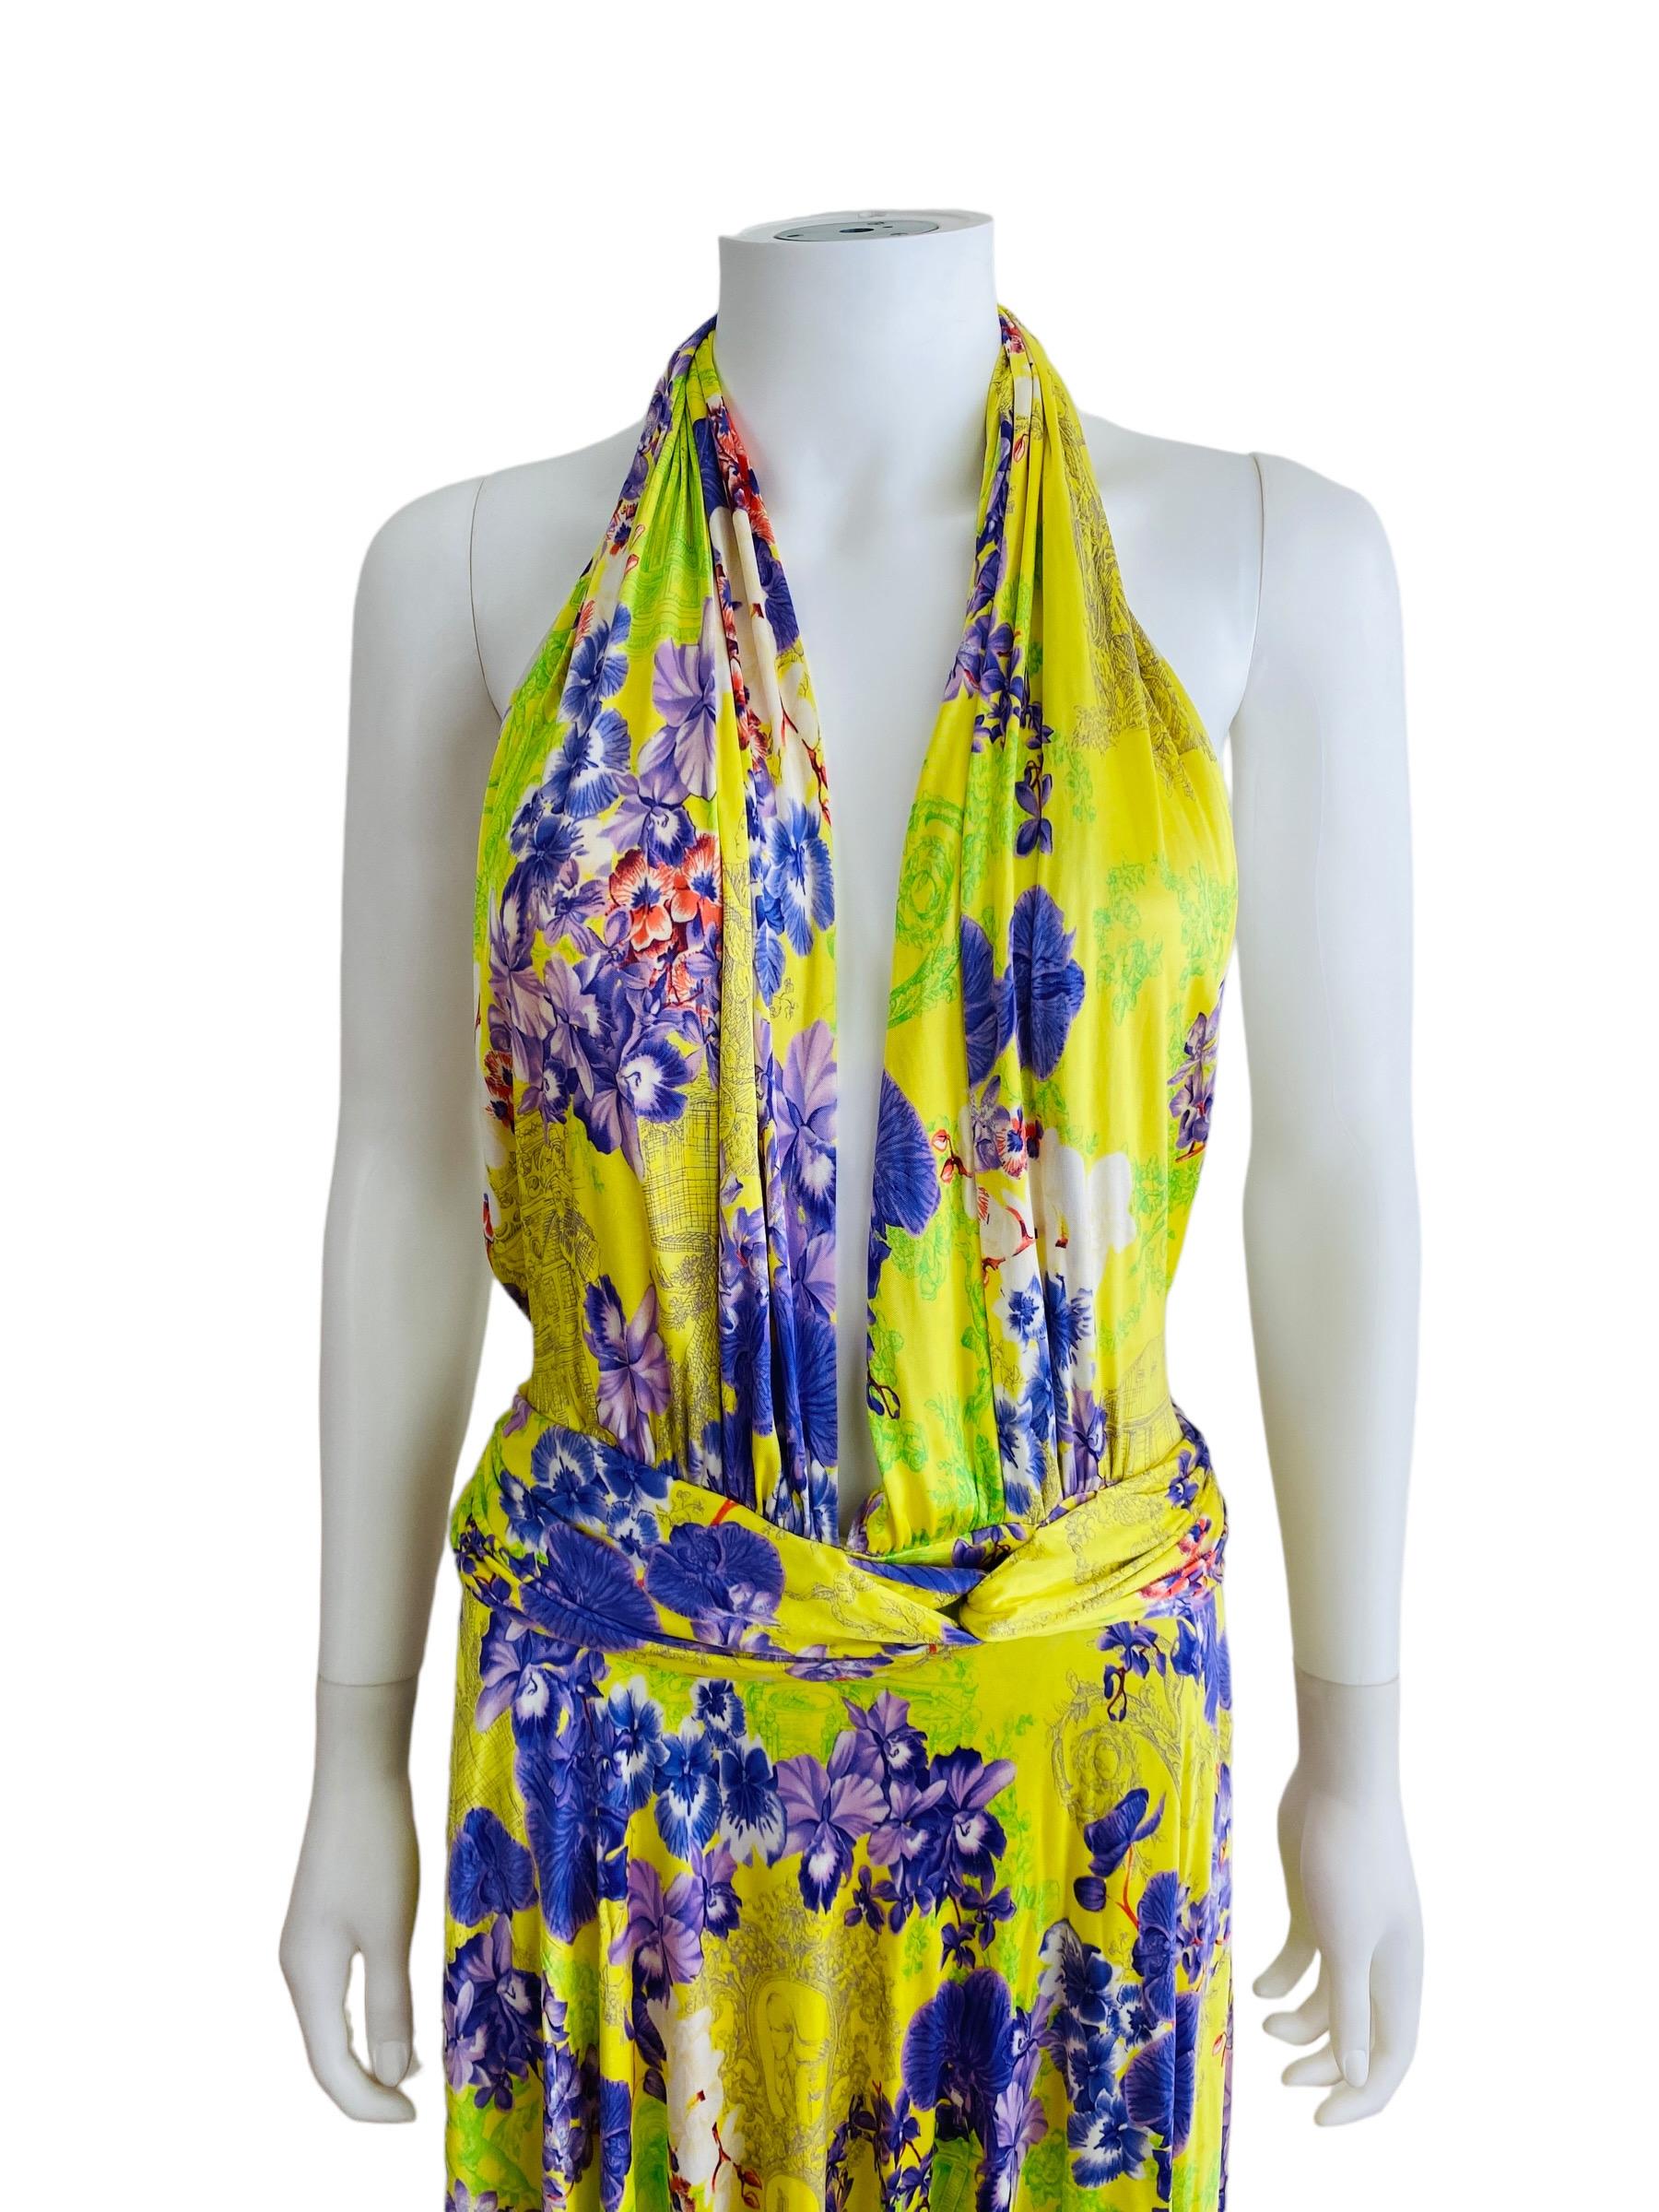 Vintage S/S 2004 Versace Dress Bright Yellow + Purple Orchid Floral Runway For Sale 6